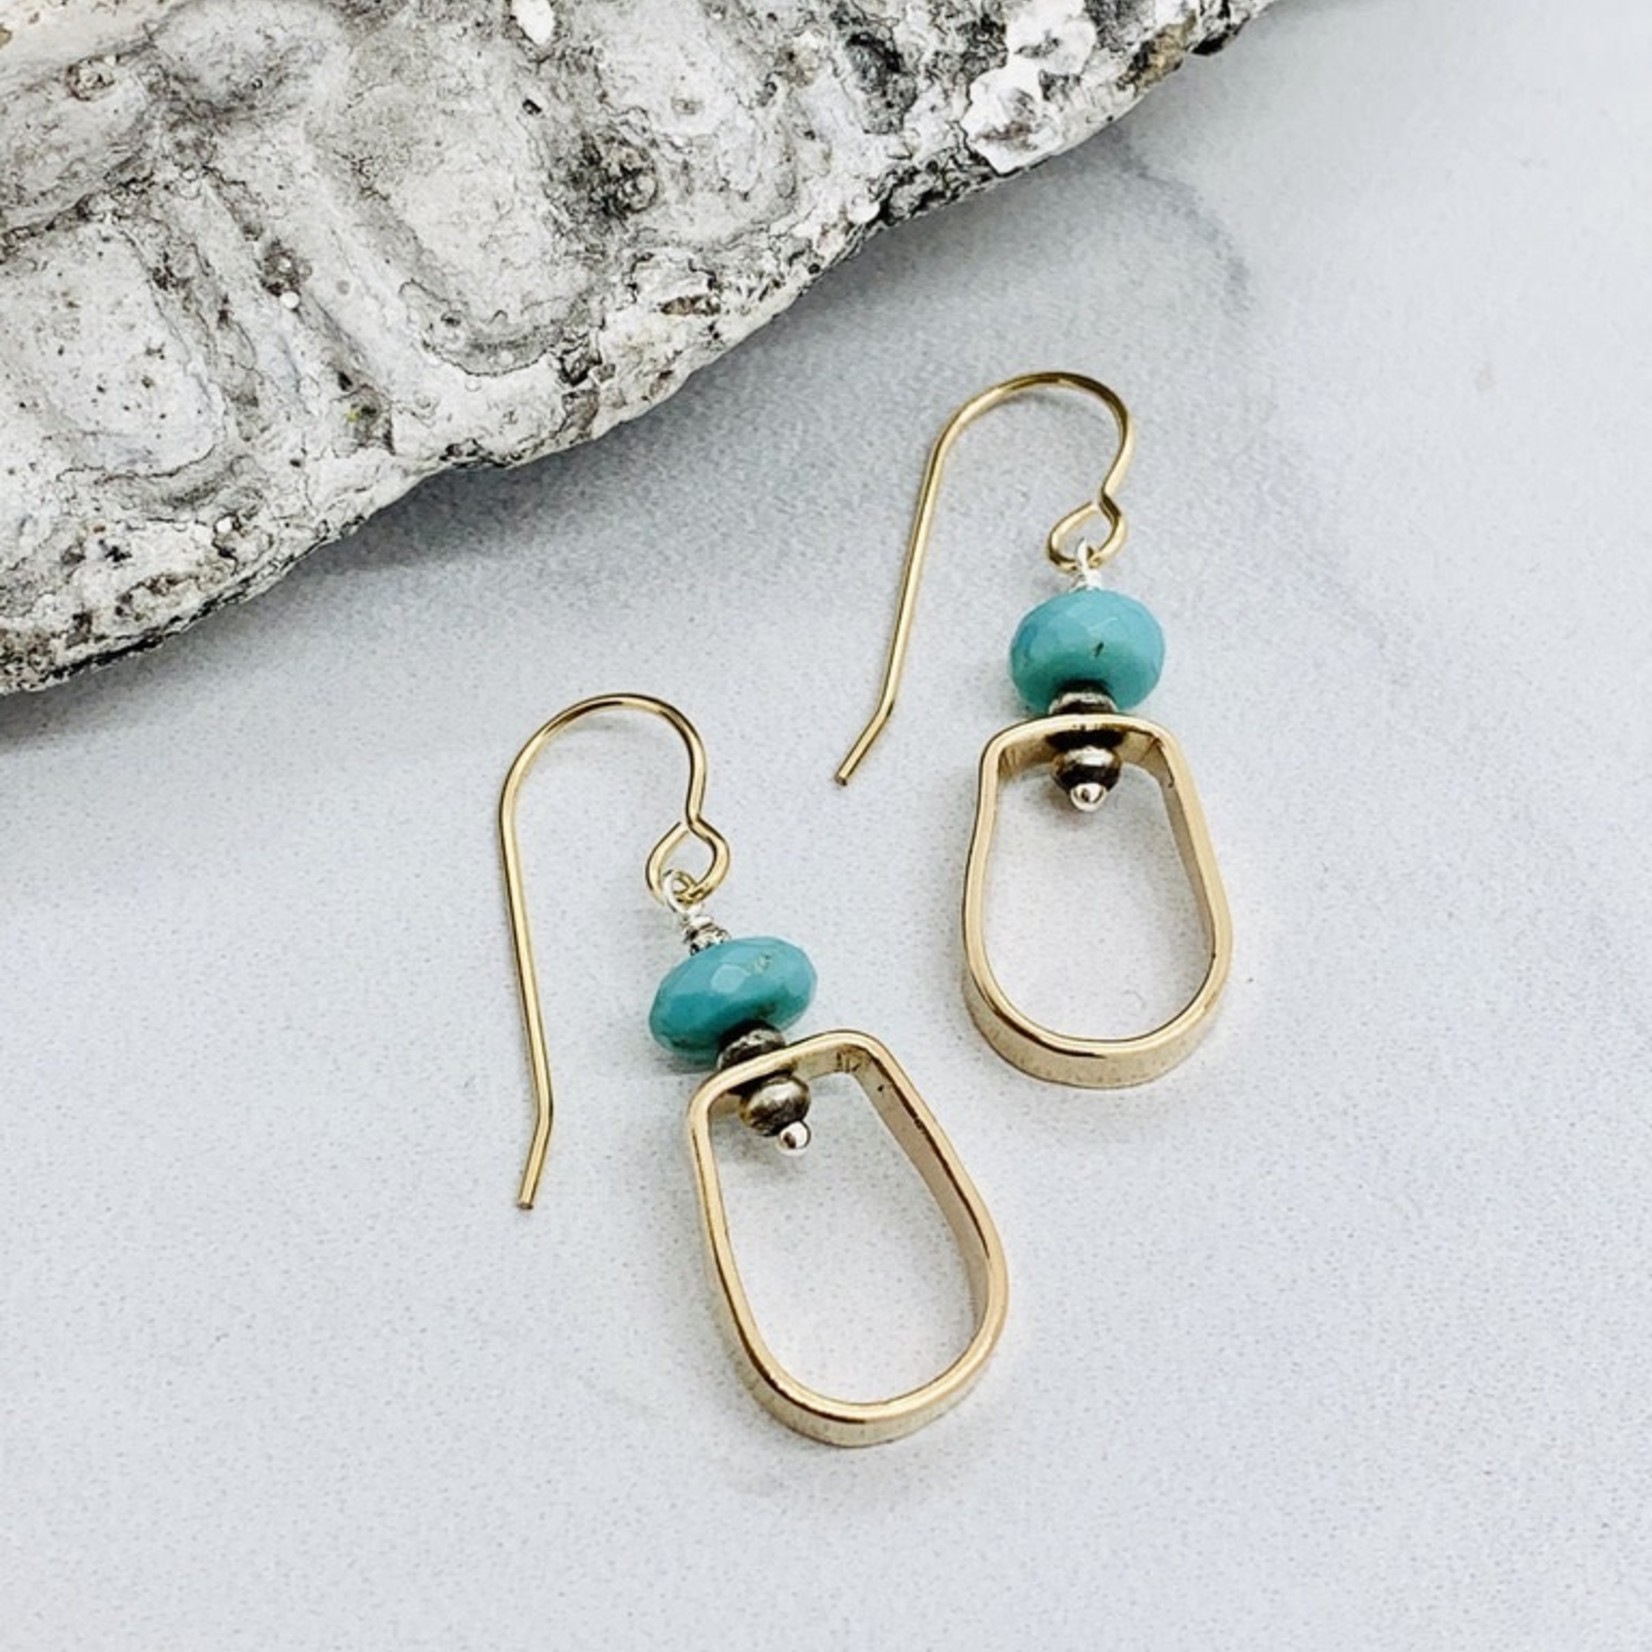 Handmade Earrings with 14k Gold Filled Shape with 8mm Faceted Arizona Turquoise